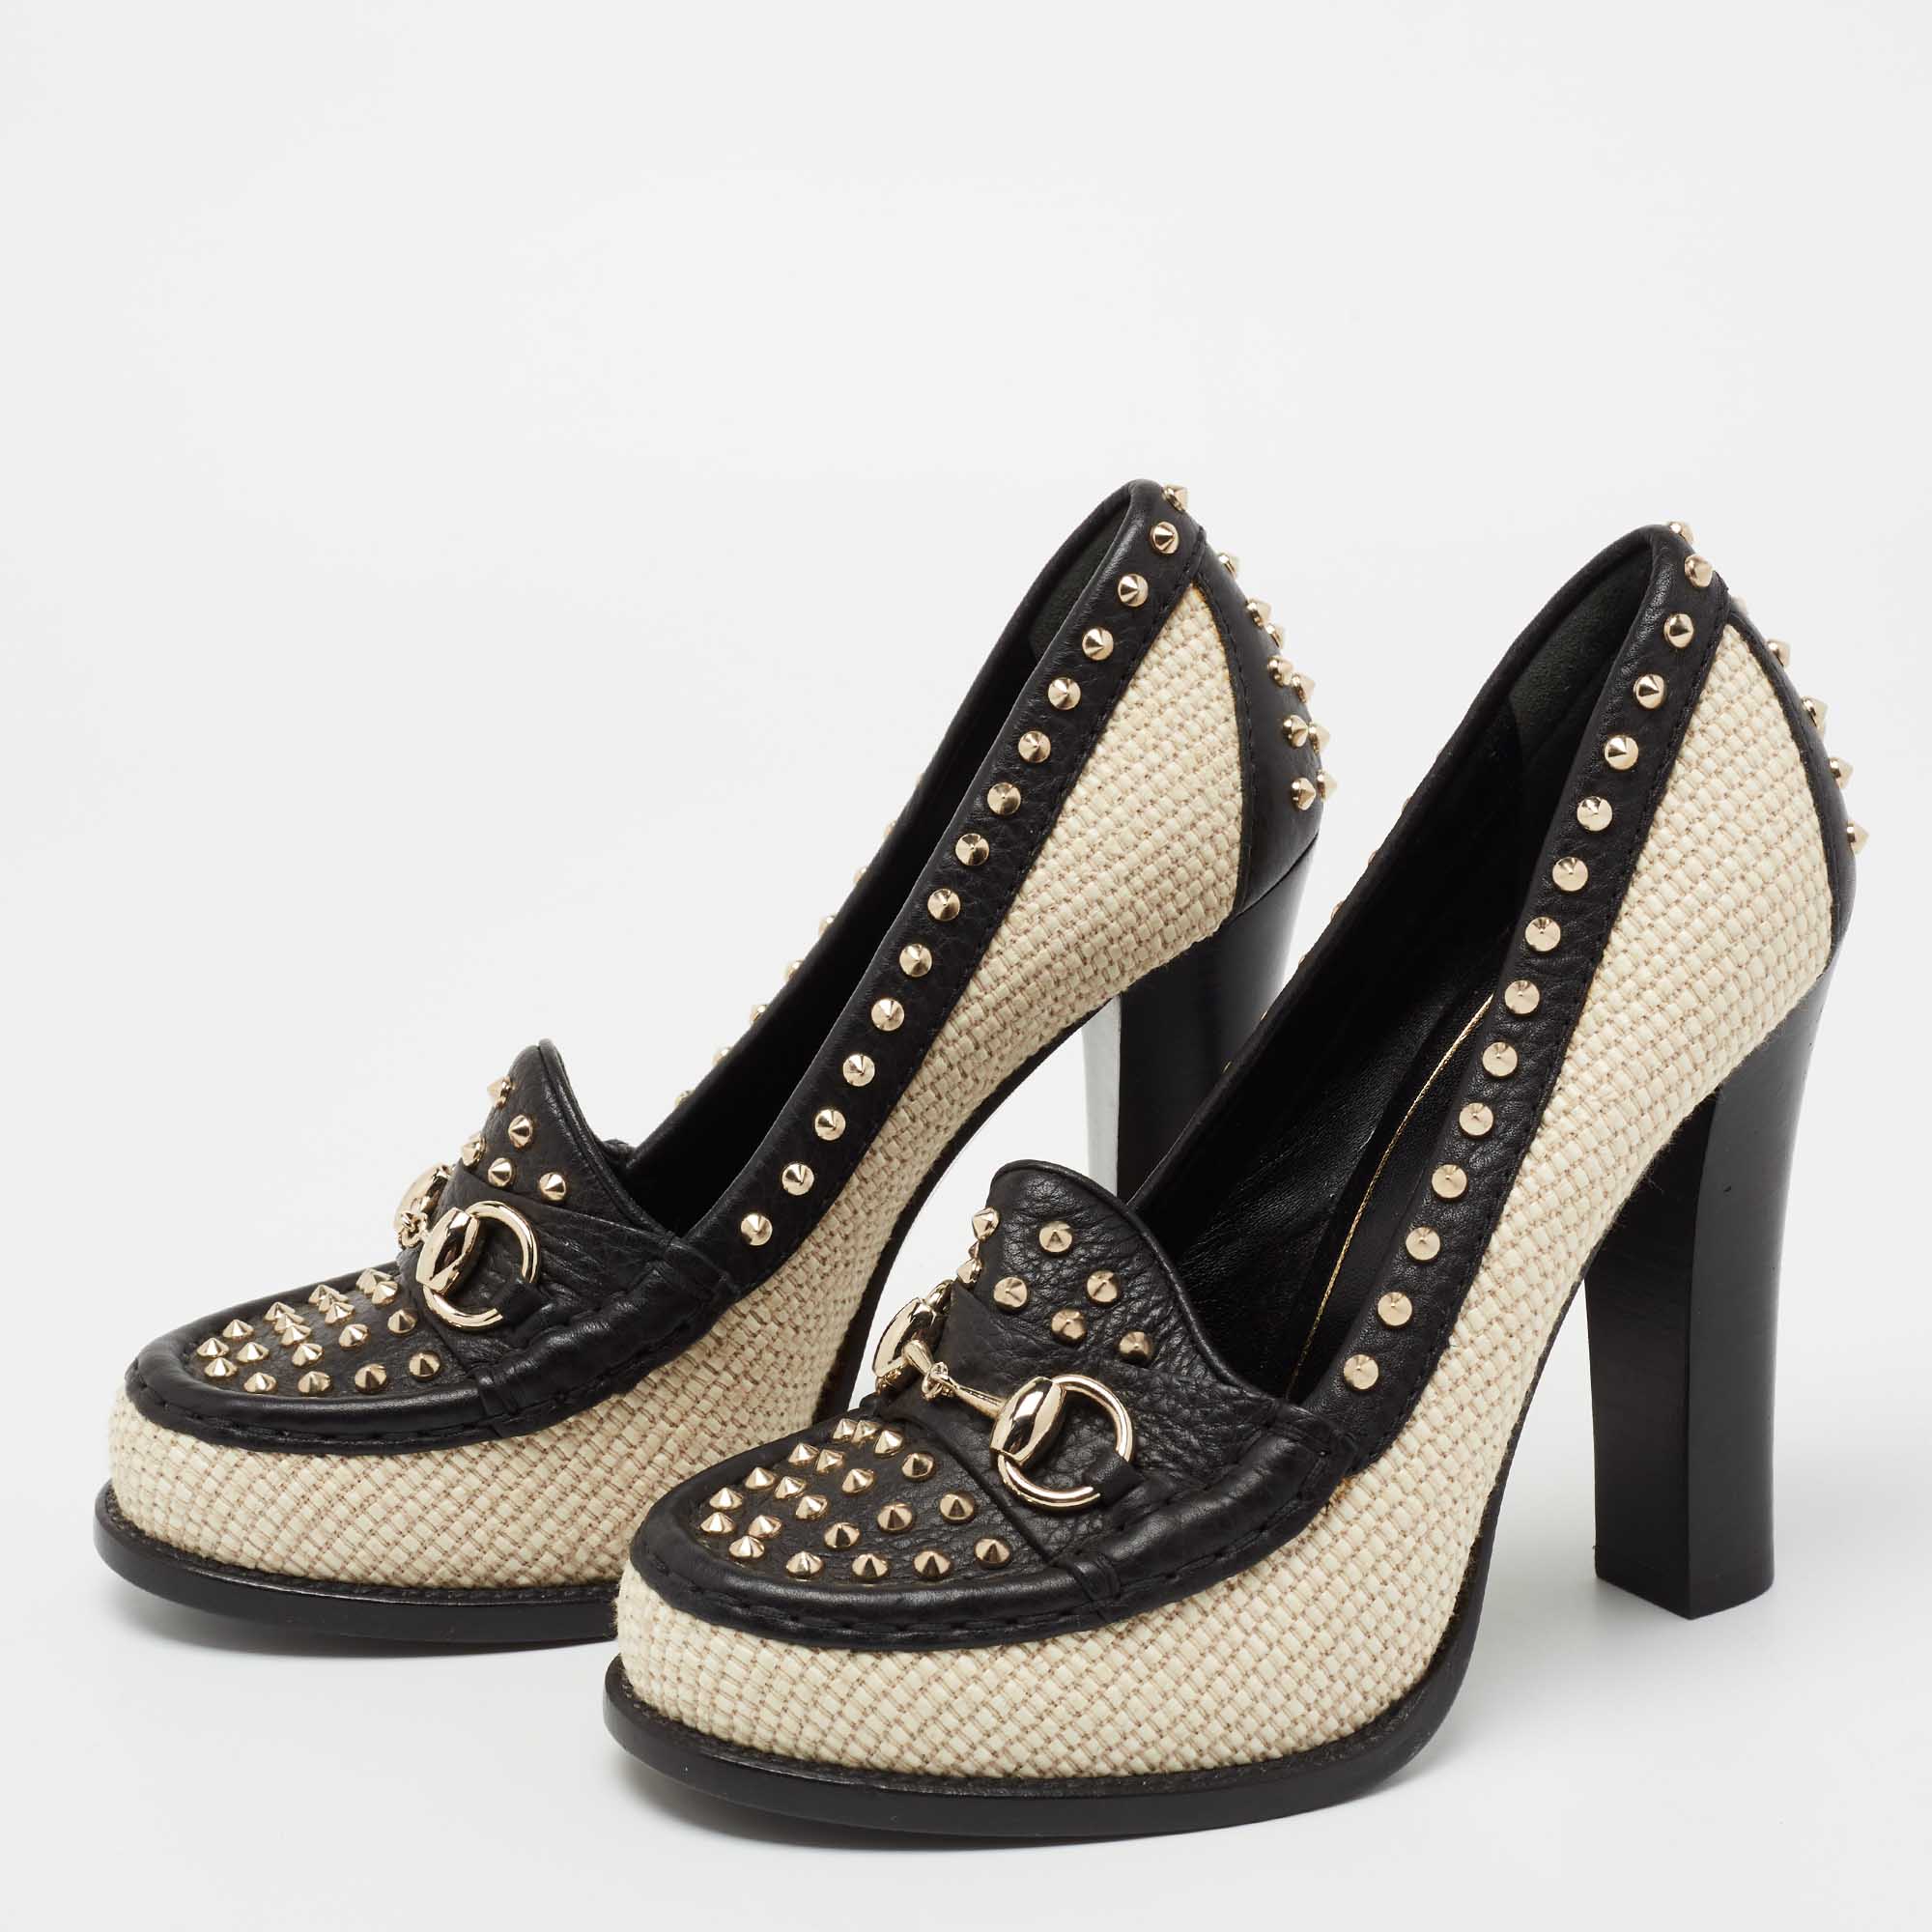 

Gucci Black/Cream Leather and Straw Studded Horsebit Alyssa Loafer Pumps Size